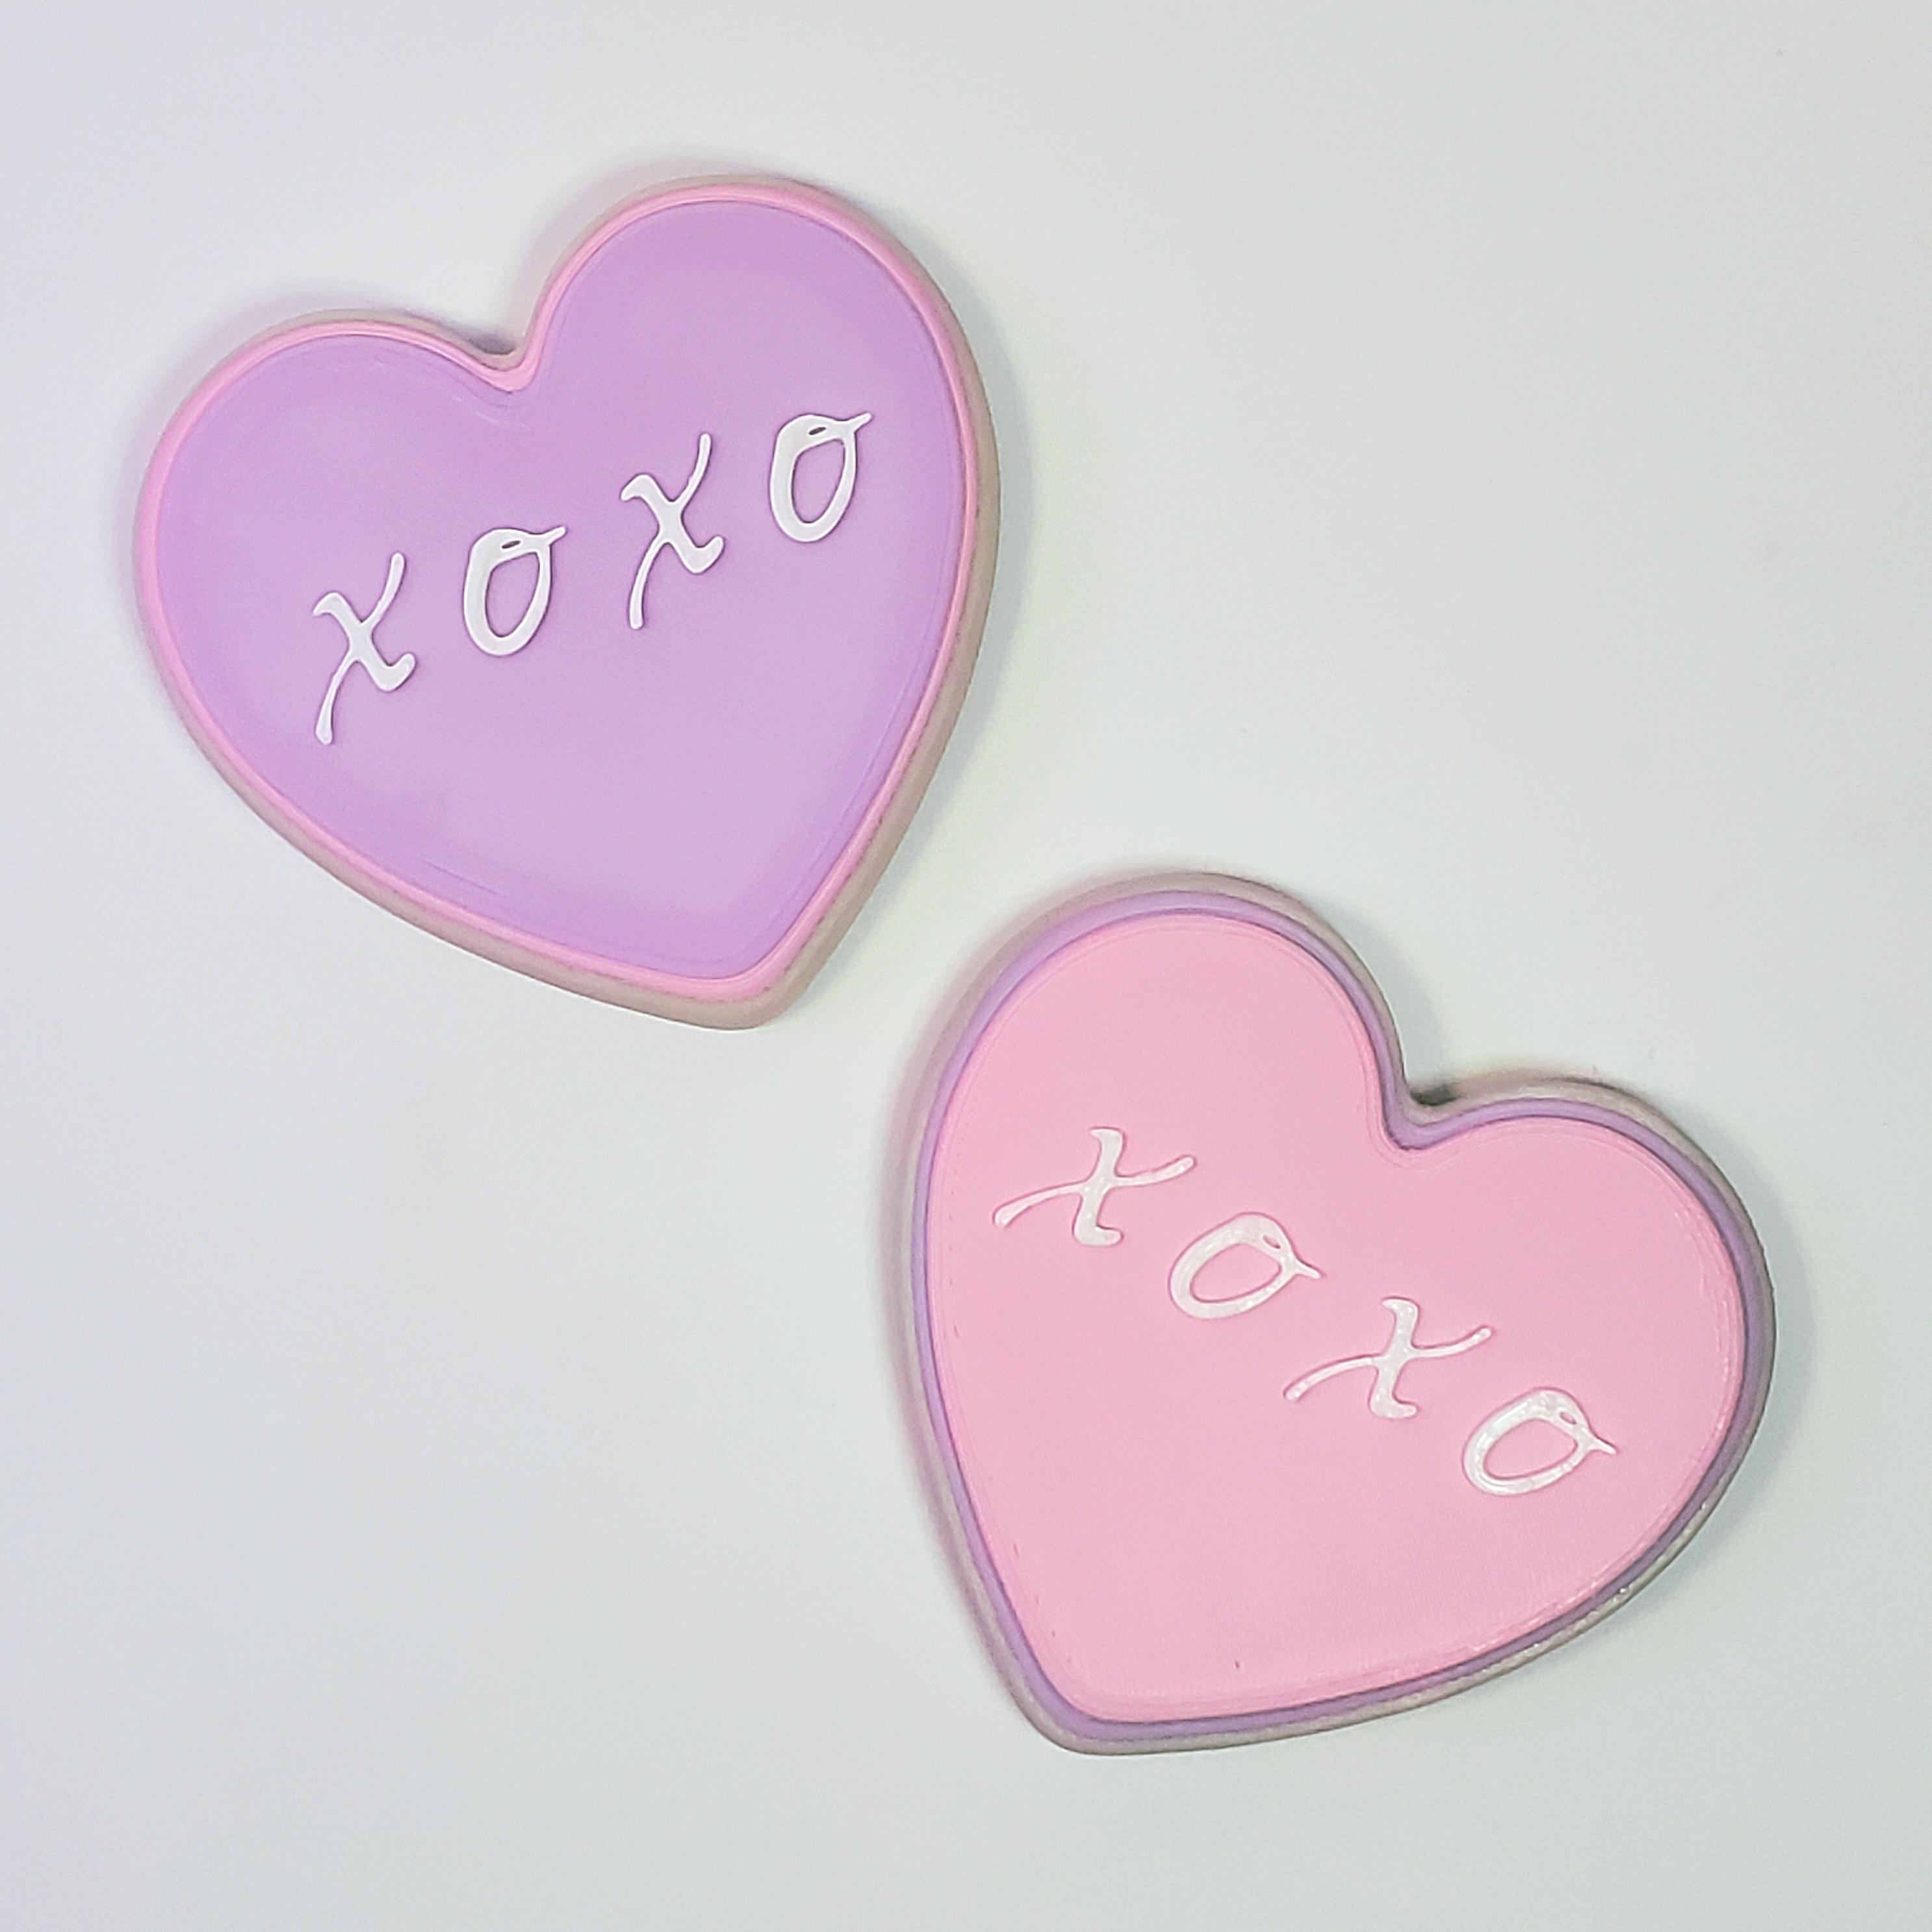 'XOXO' Heart-Shaped Shortbread Cookie with Royal Icing for Valentine's Day :: Delicious Desserts! 3d model